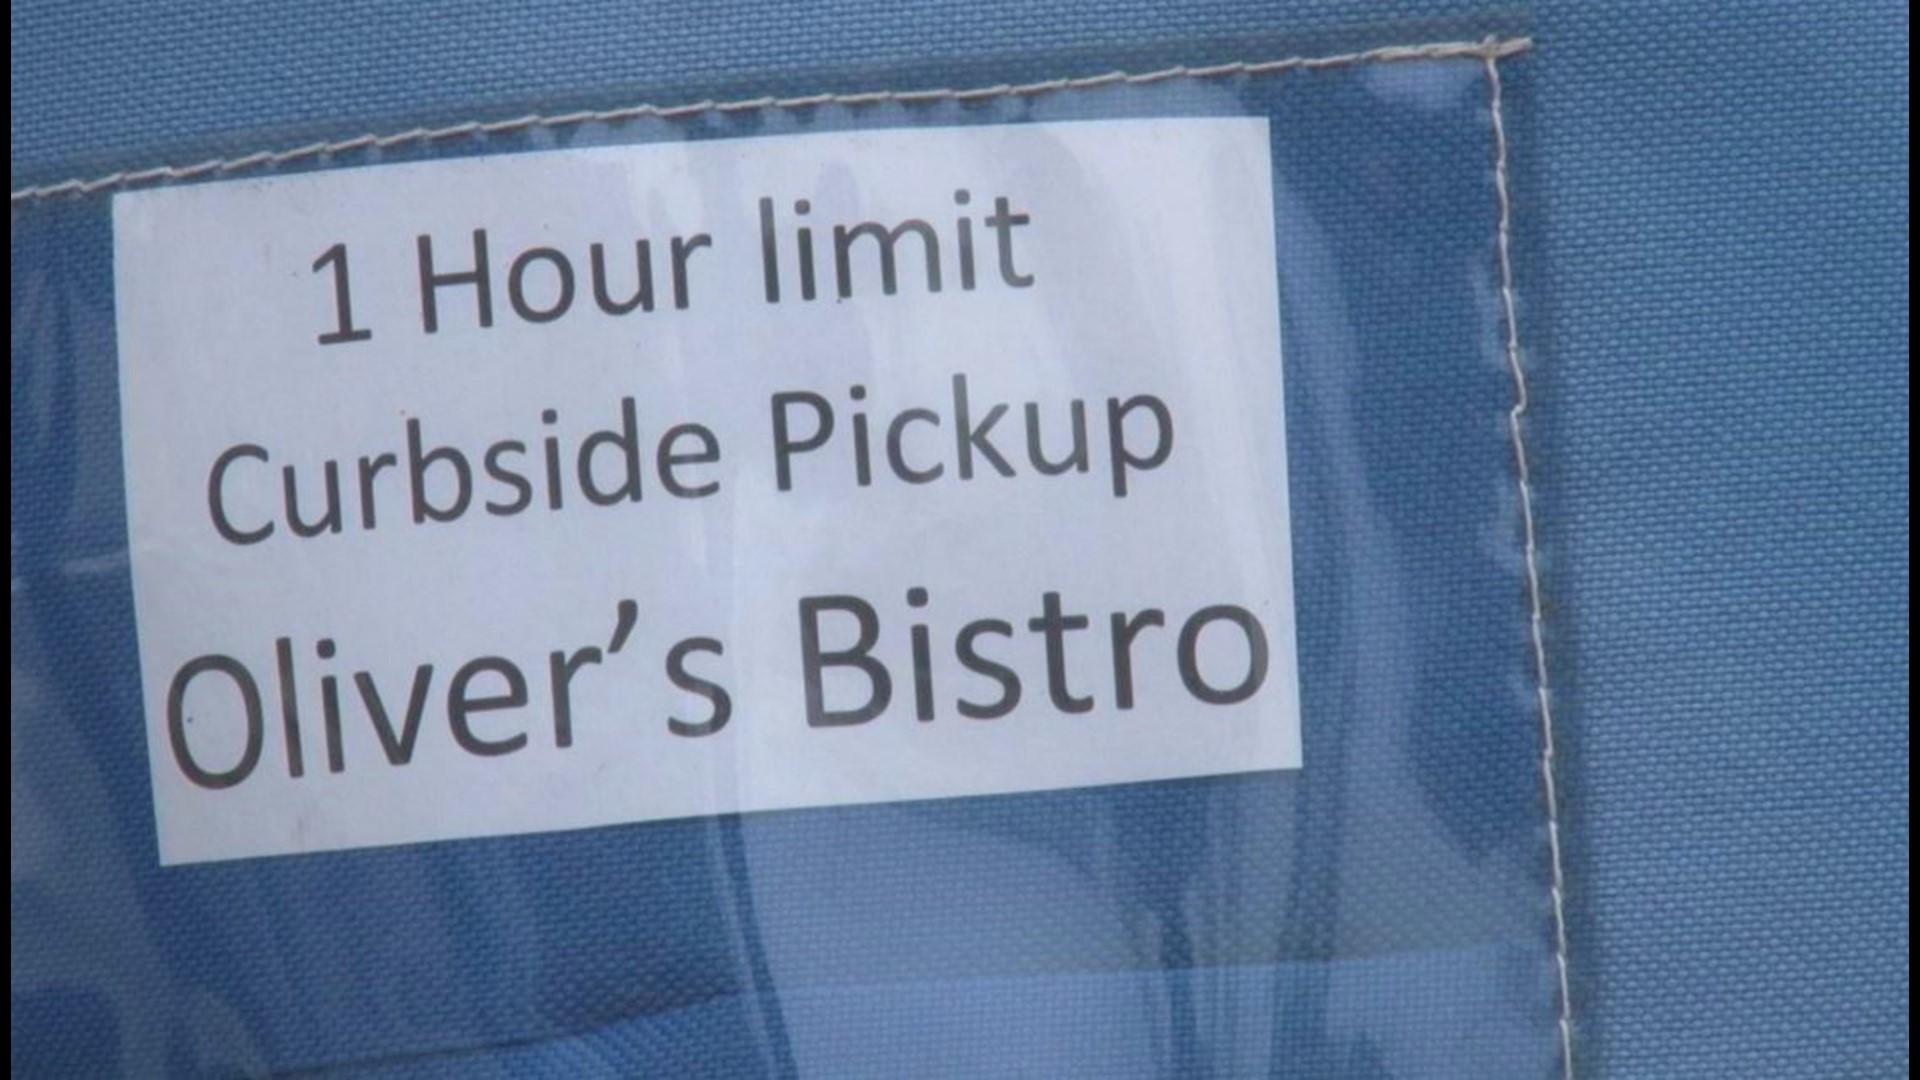 To keep patrons safe and business flowing, restaurants in downtown Macon are offering curbside pickup